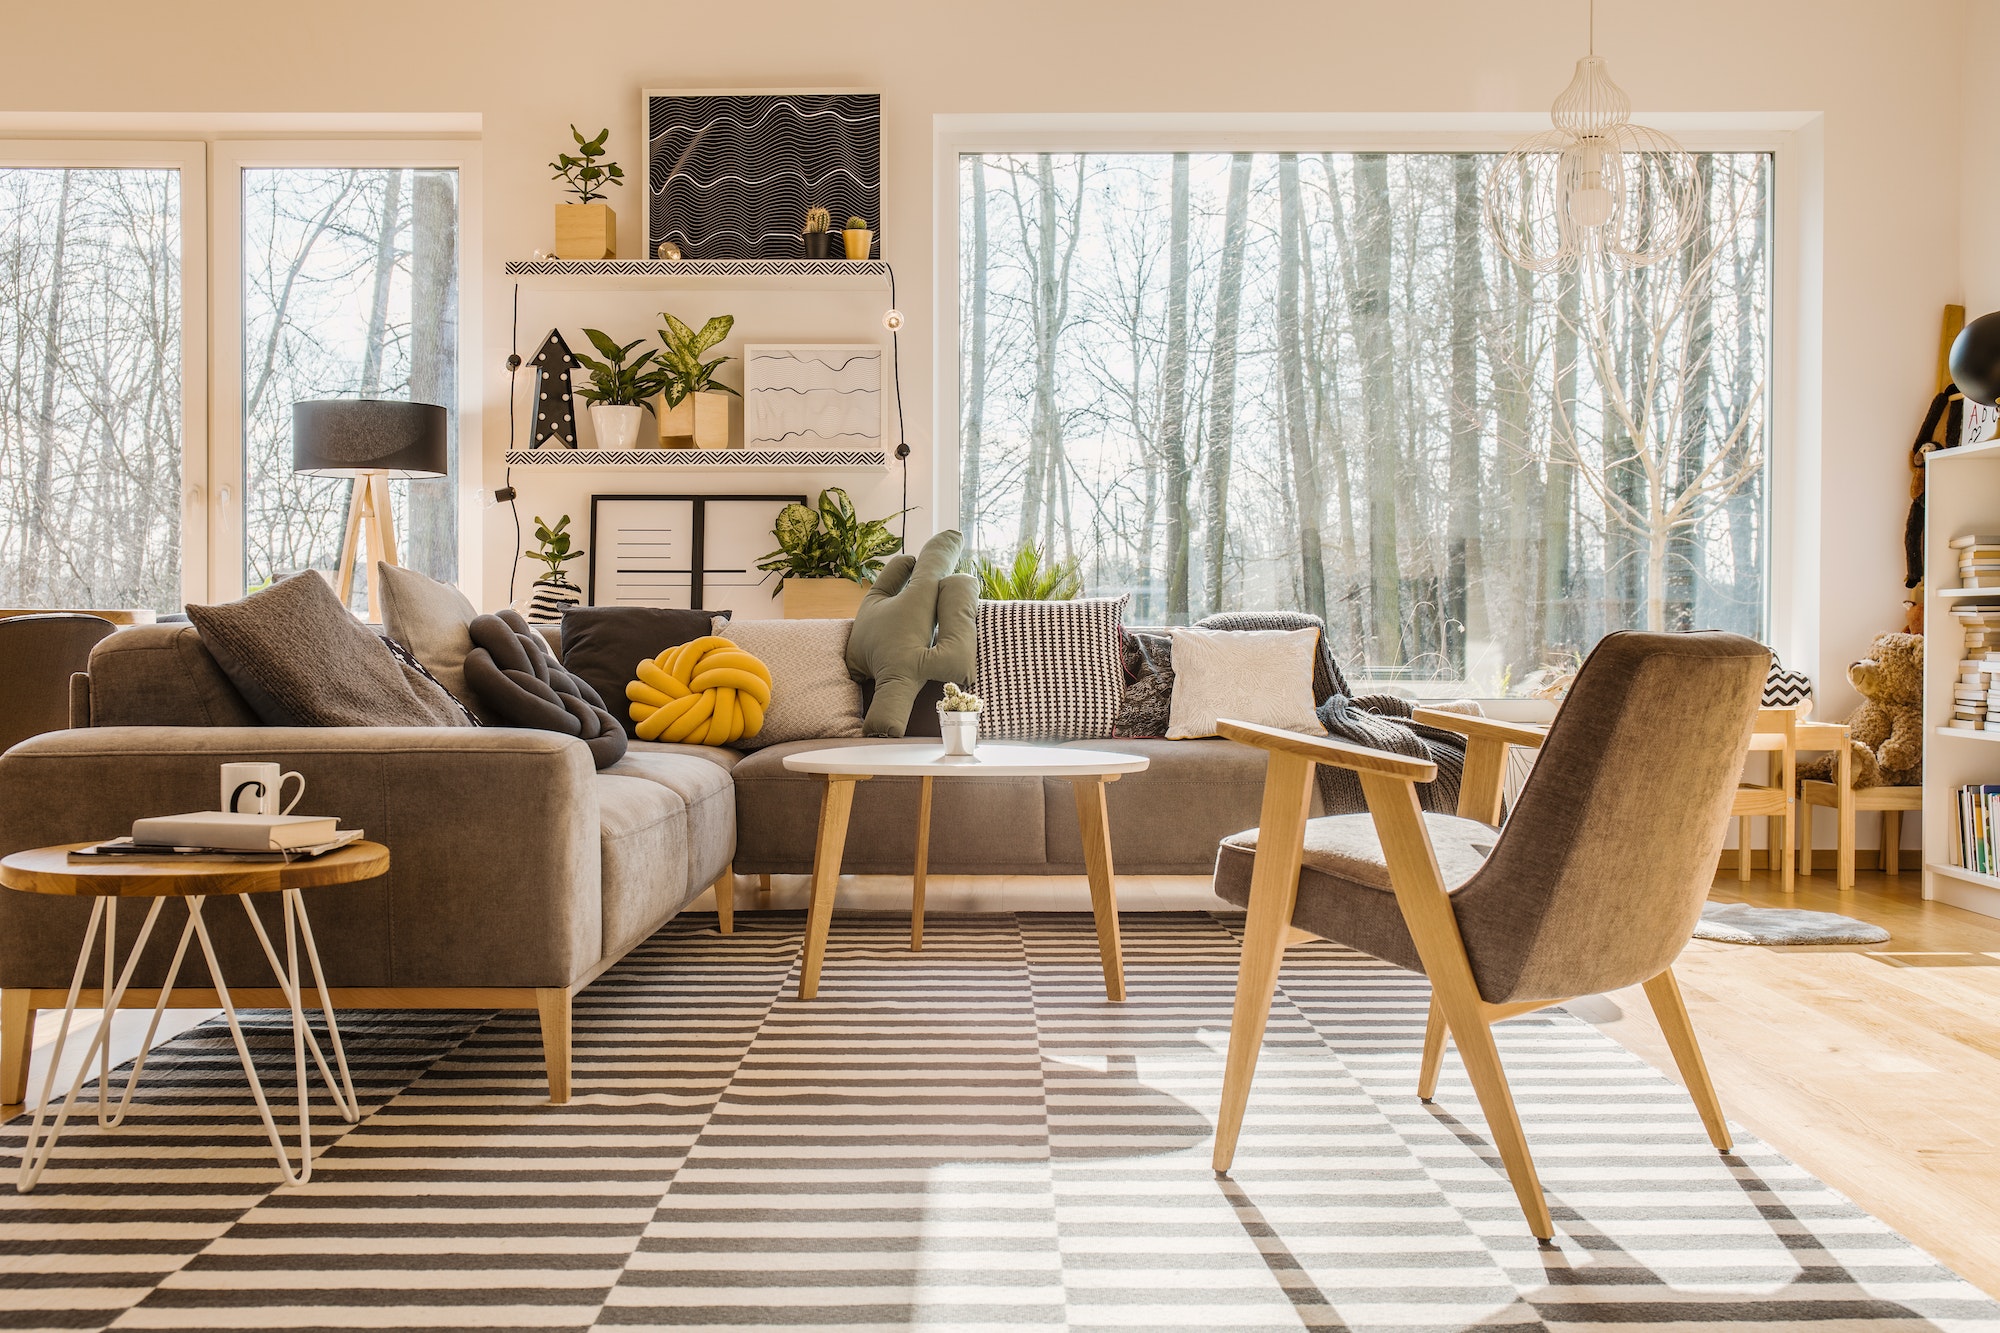 Low angle view of a scandinavian, sunlit living room interior wi